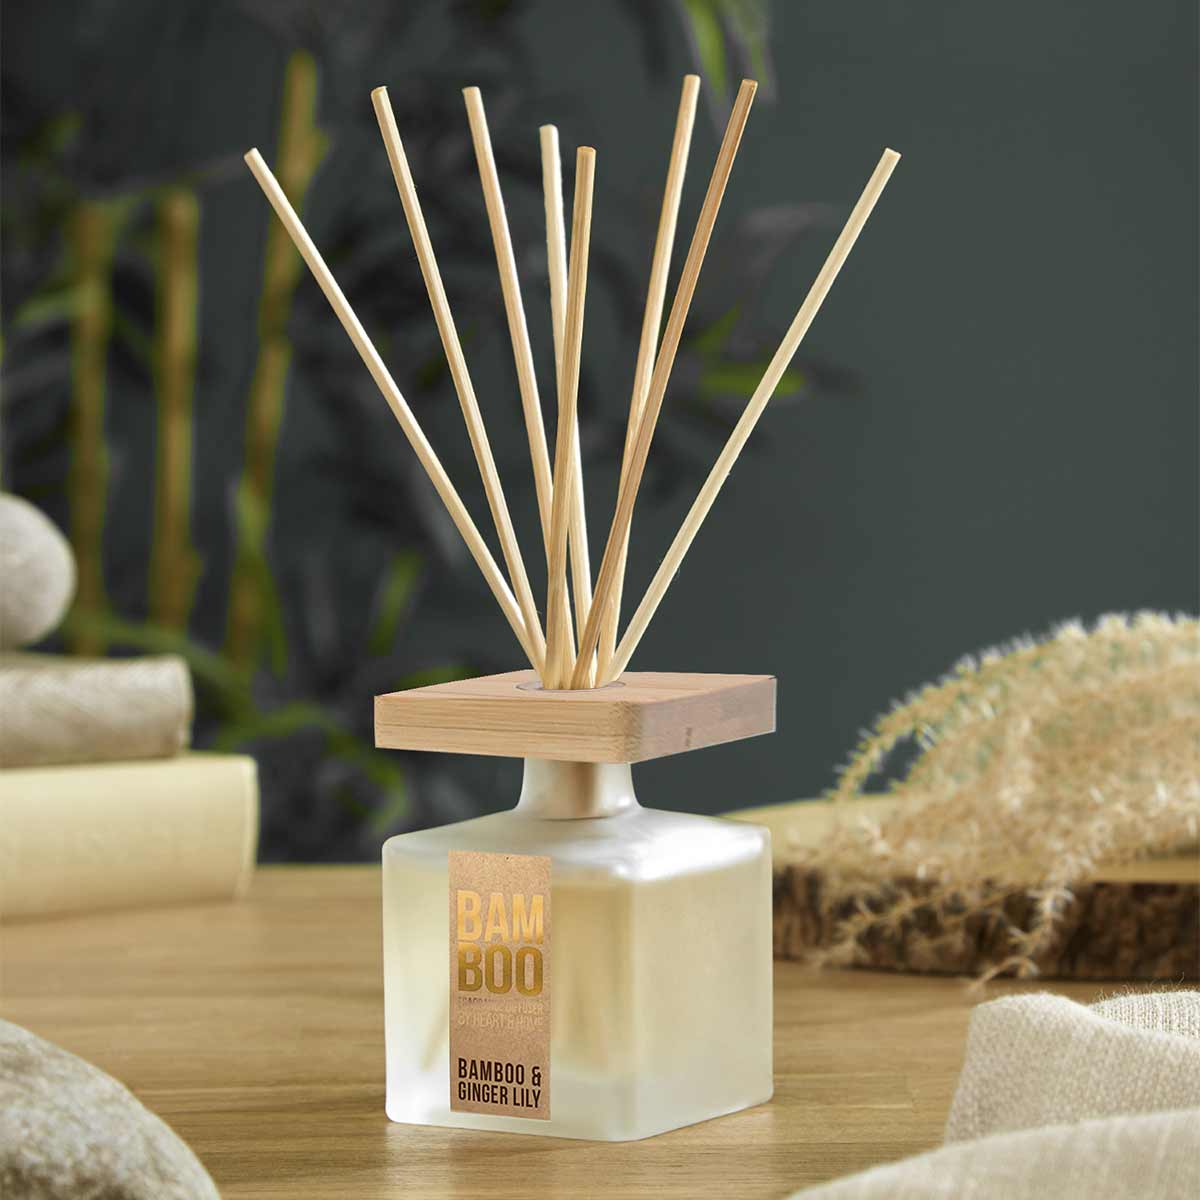 Heart and Home eco-friendly stick diffuser - Bamboo Ginger